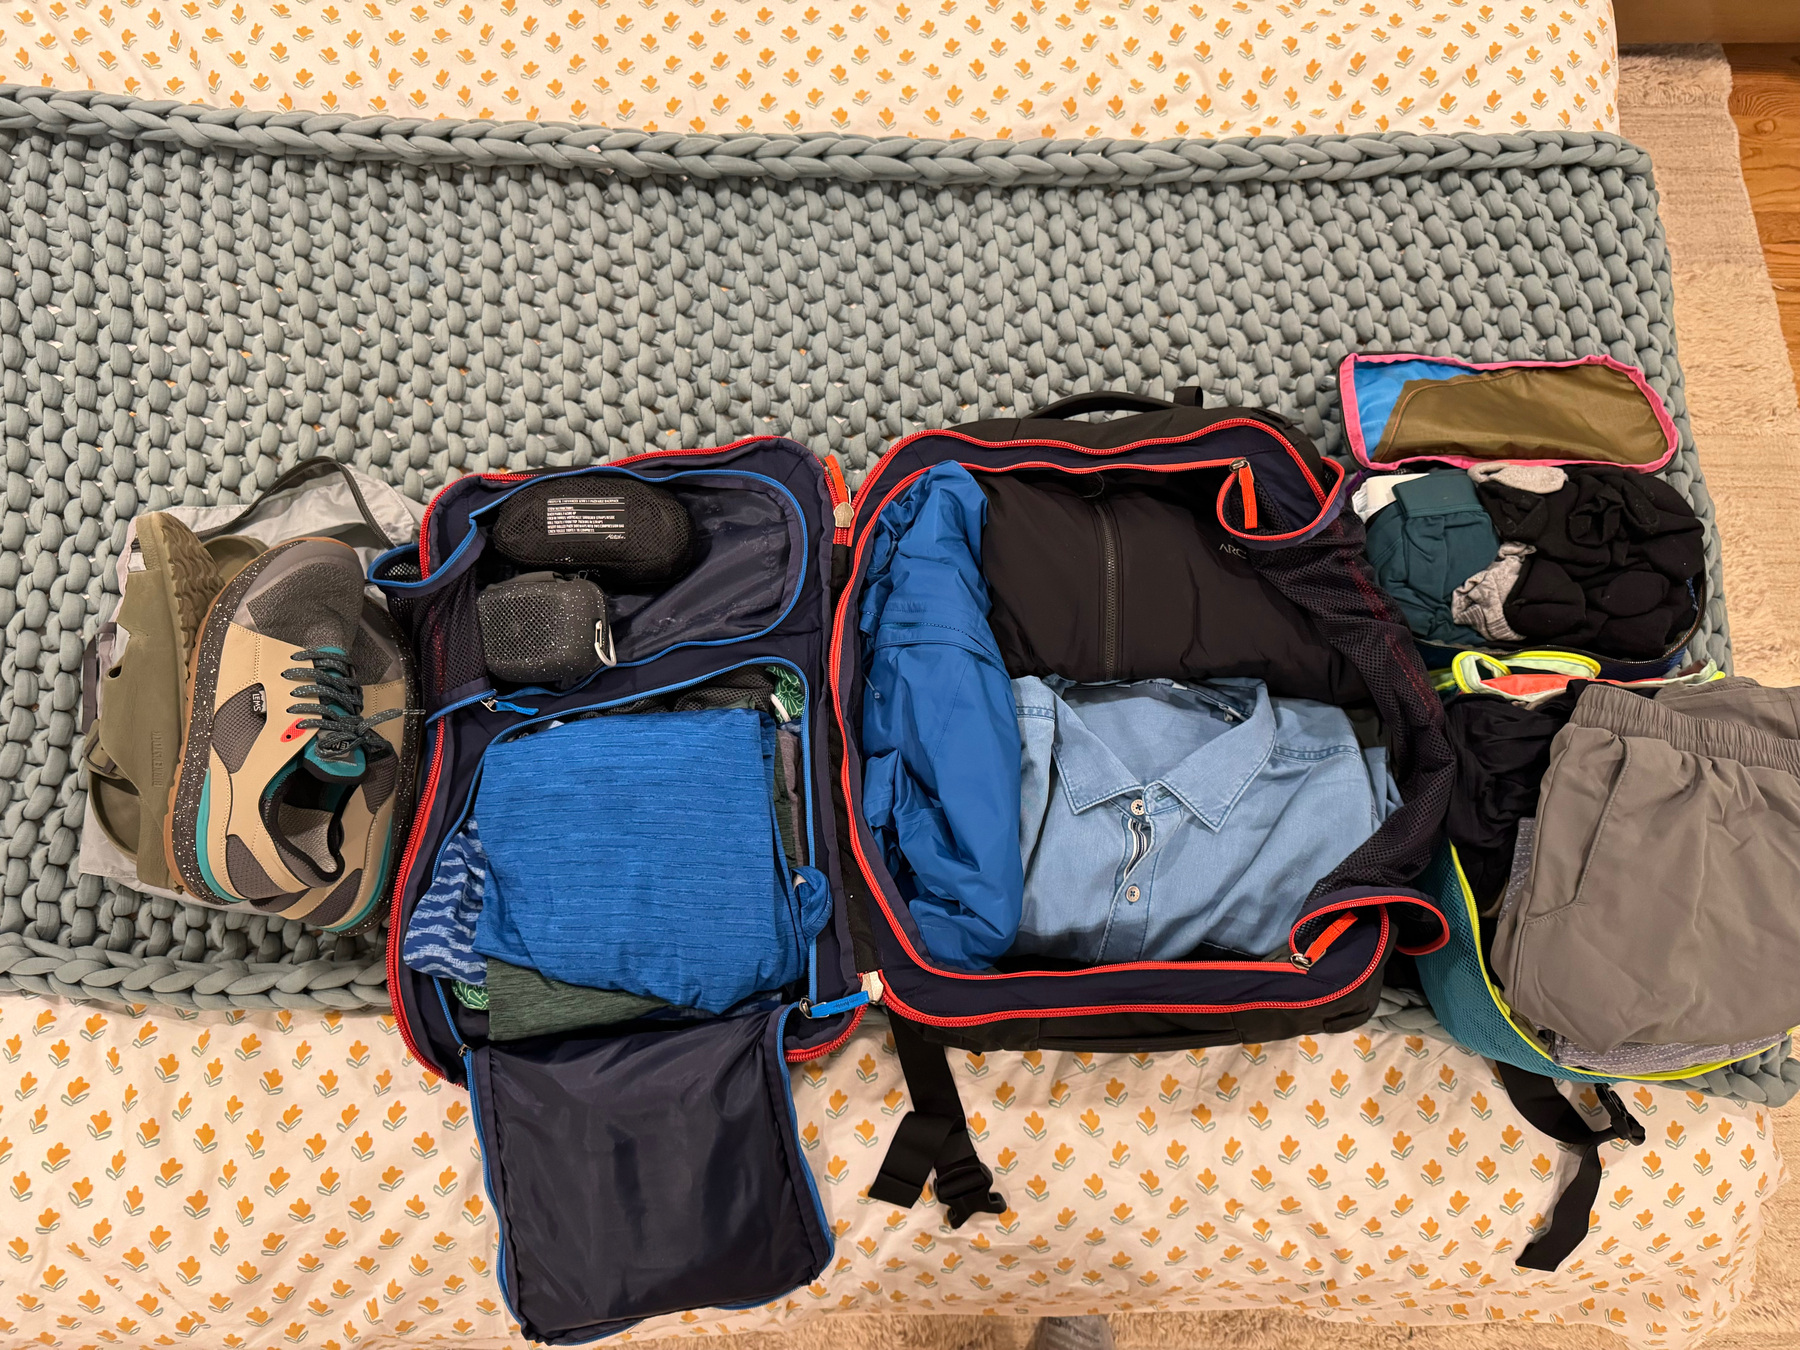 An open suitcase on a bed with neatly organized clothes and a pair of shoes beside it. The suitcase contains various clothing items including shirts and pants, and utilizes packing cubes for organization.